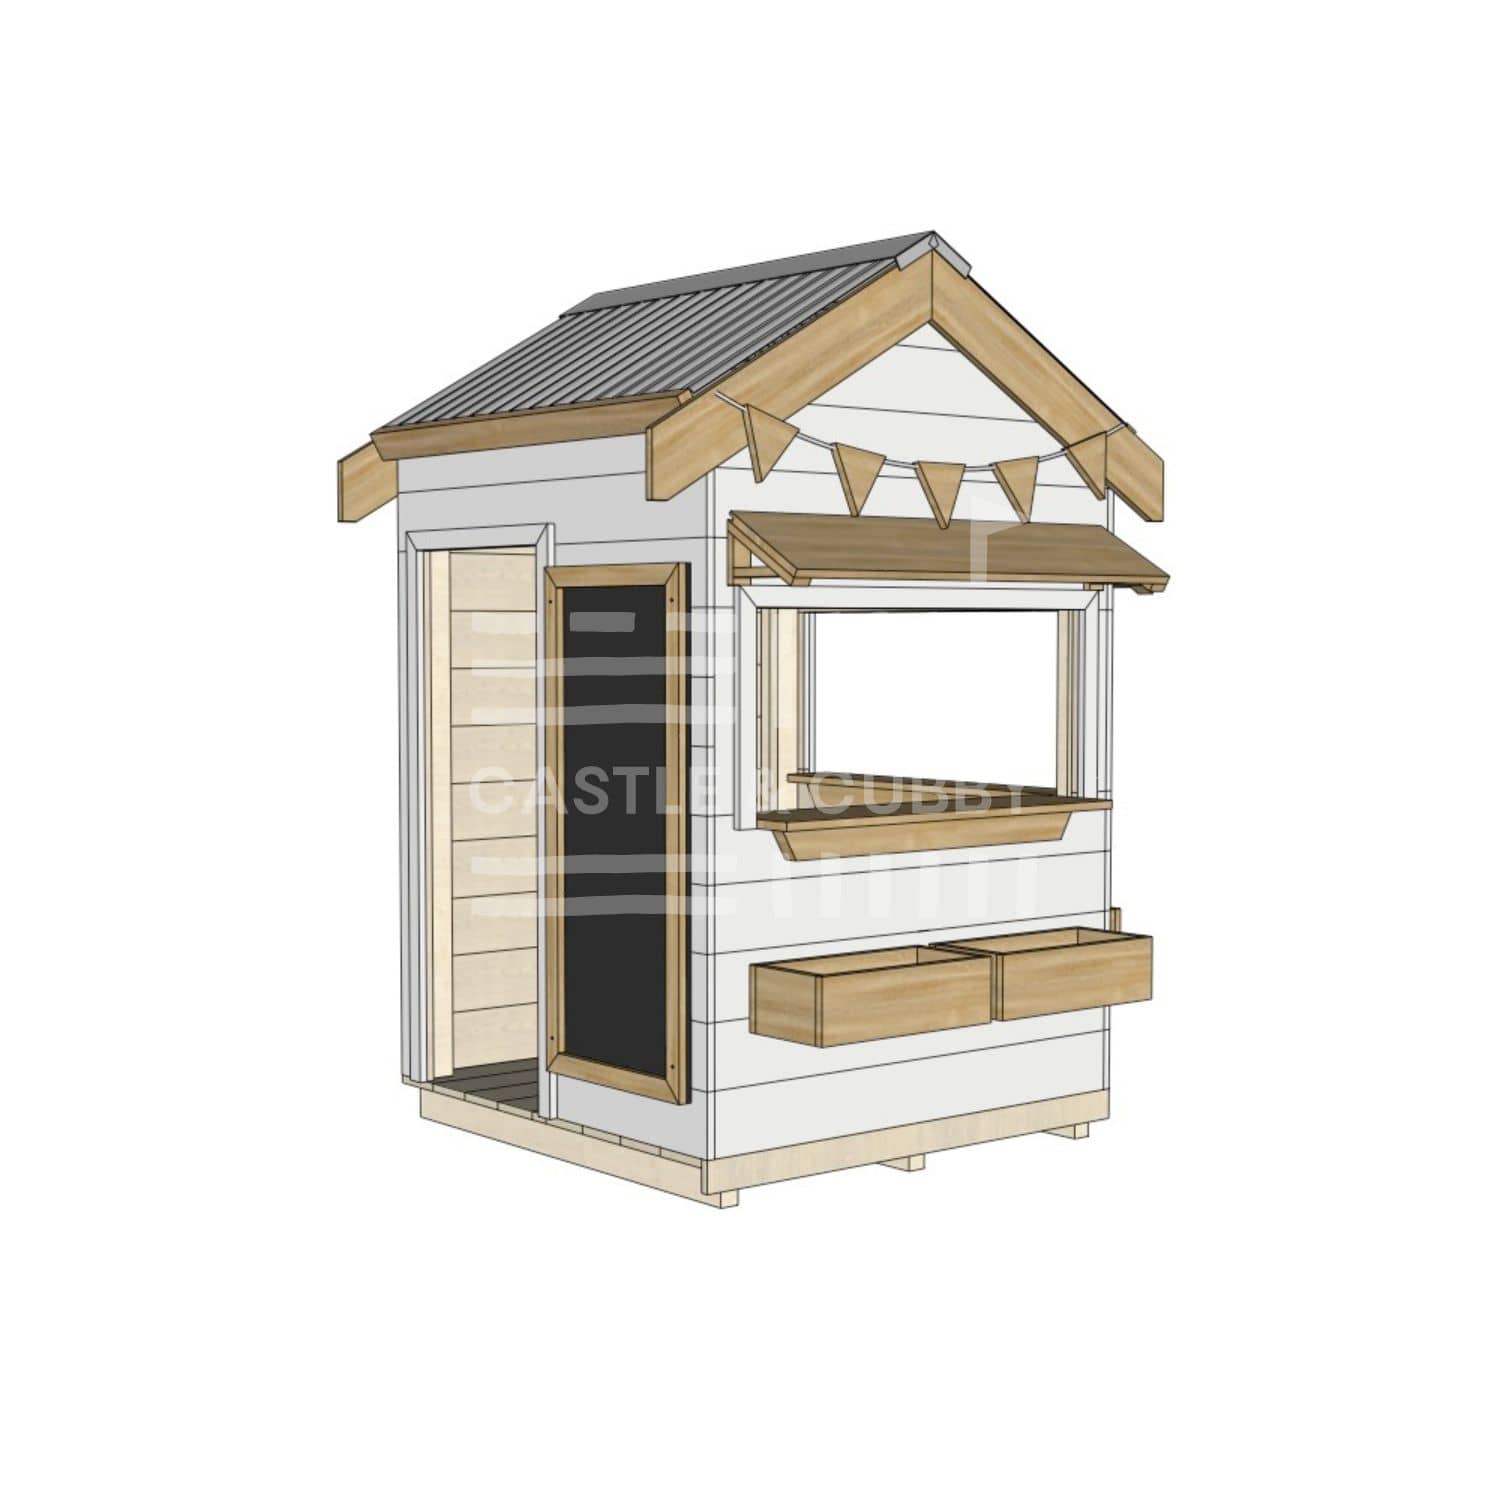 Pitched roof painted wooden cubby house commercial education little square accessories